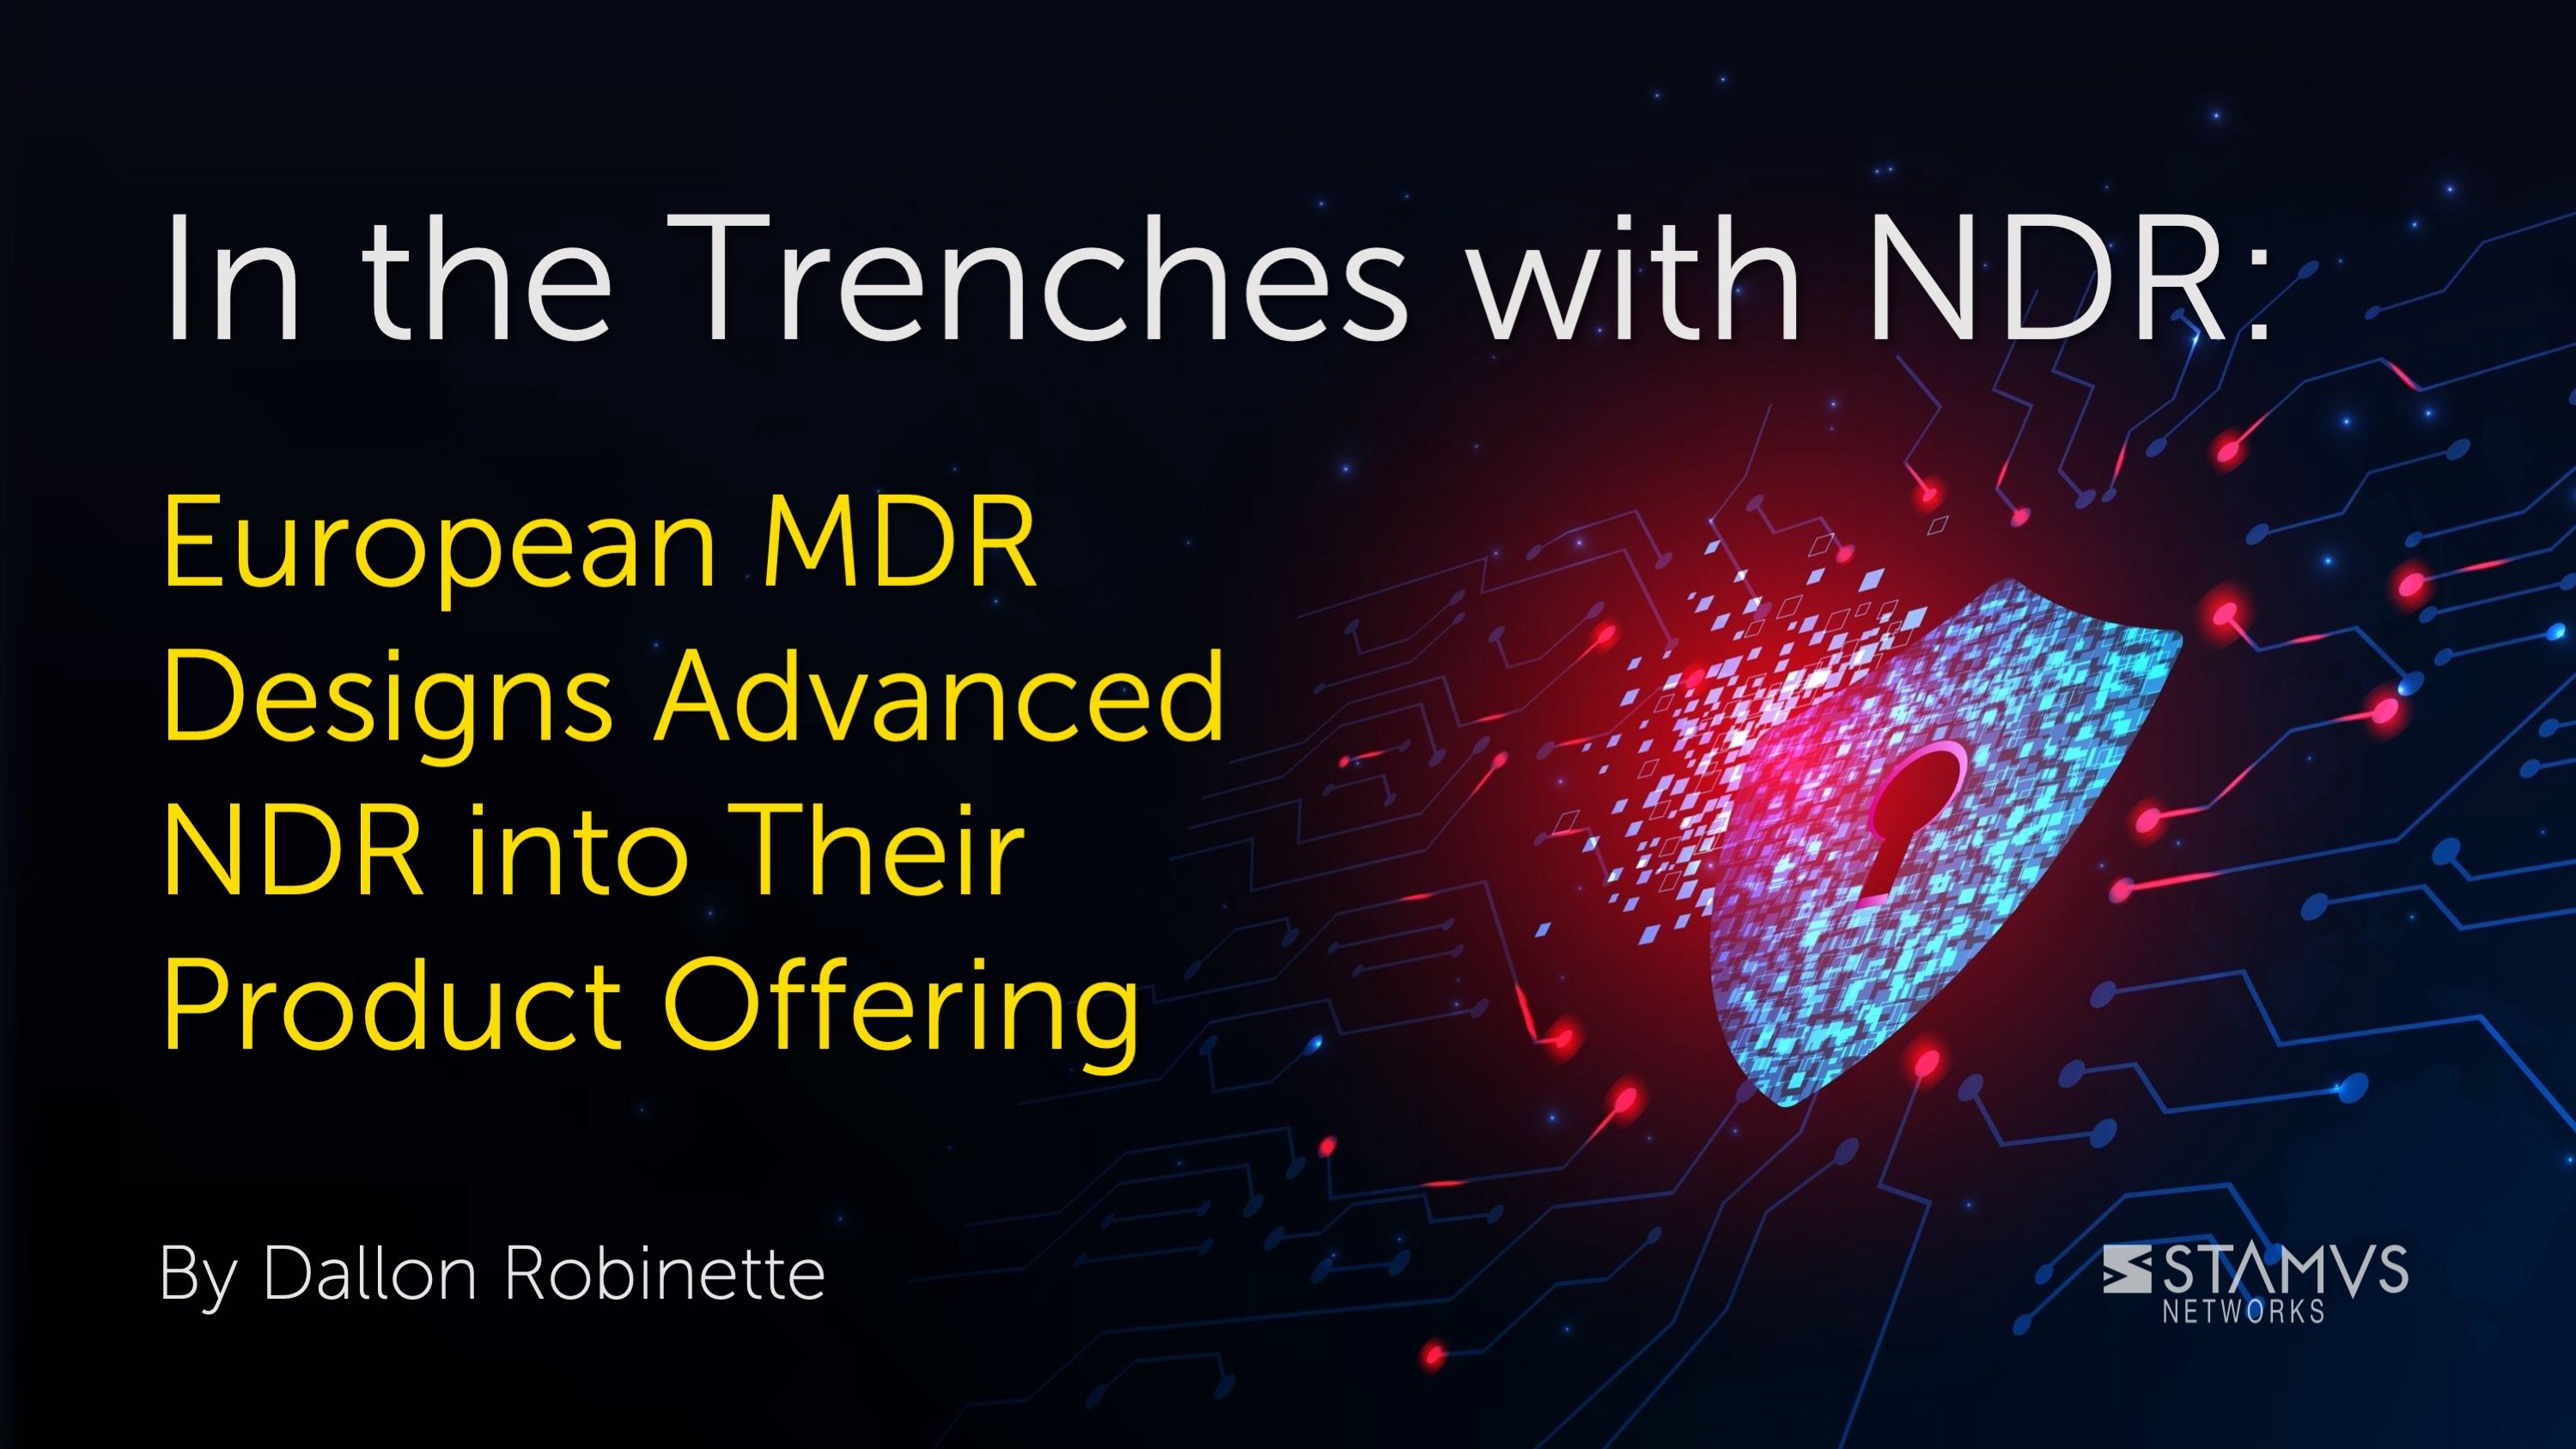 In the Trenches with NDR: European MDR Designs Advanced NDR into Their Product Offering